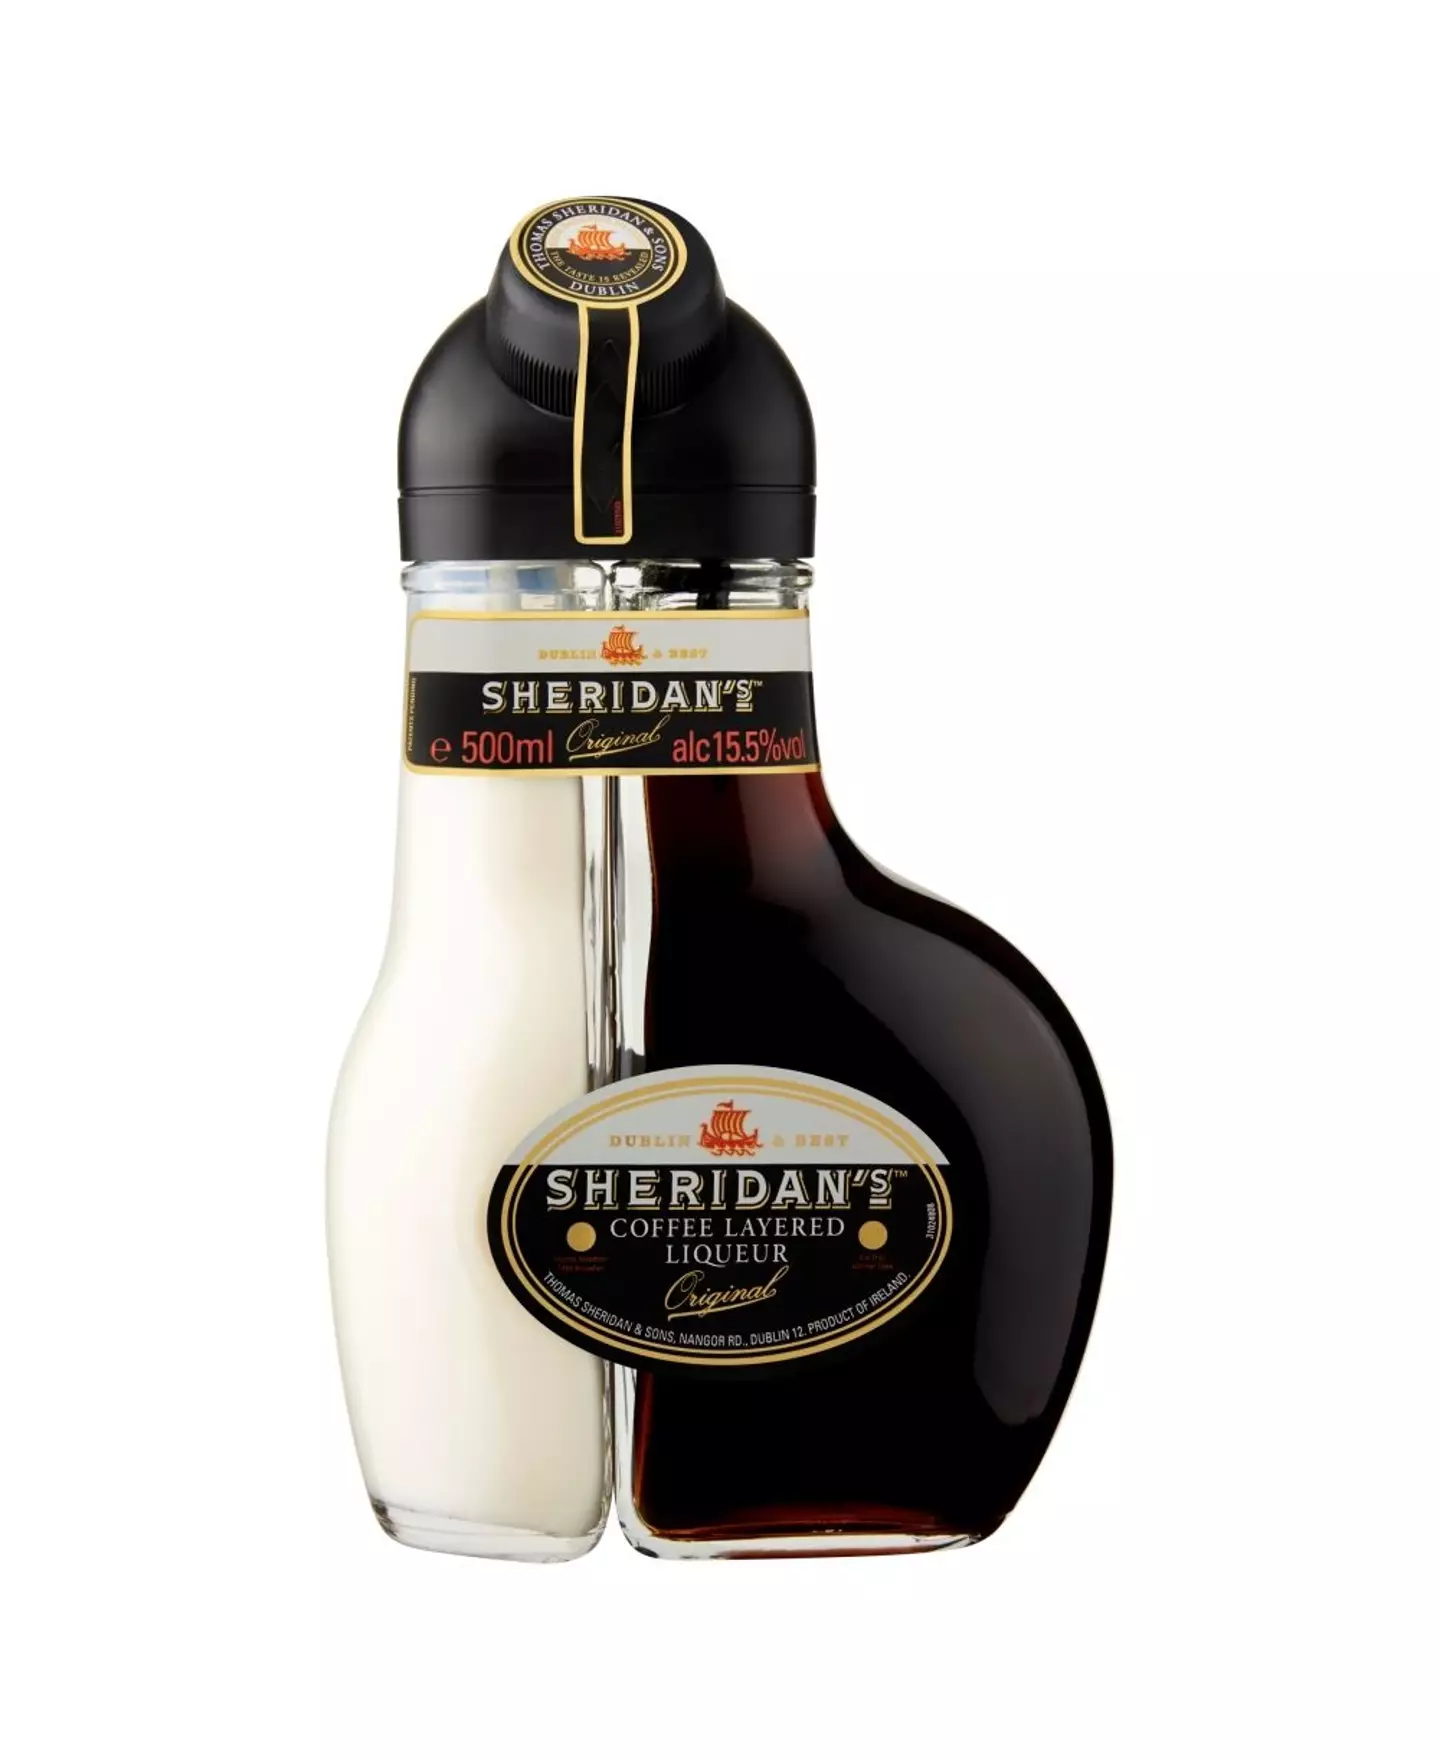 Brits are going wild for Sheridan's Coffee Layered Liqueur.